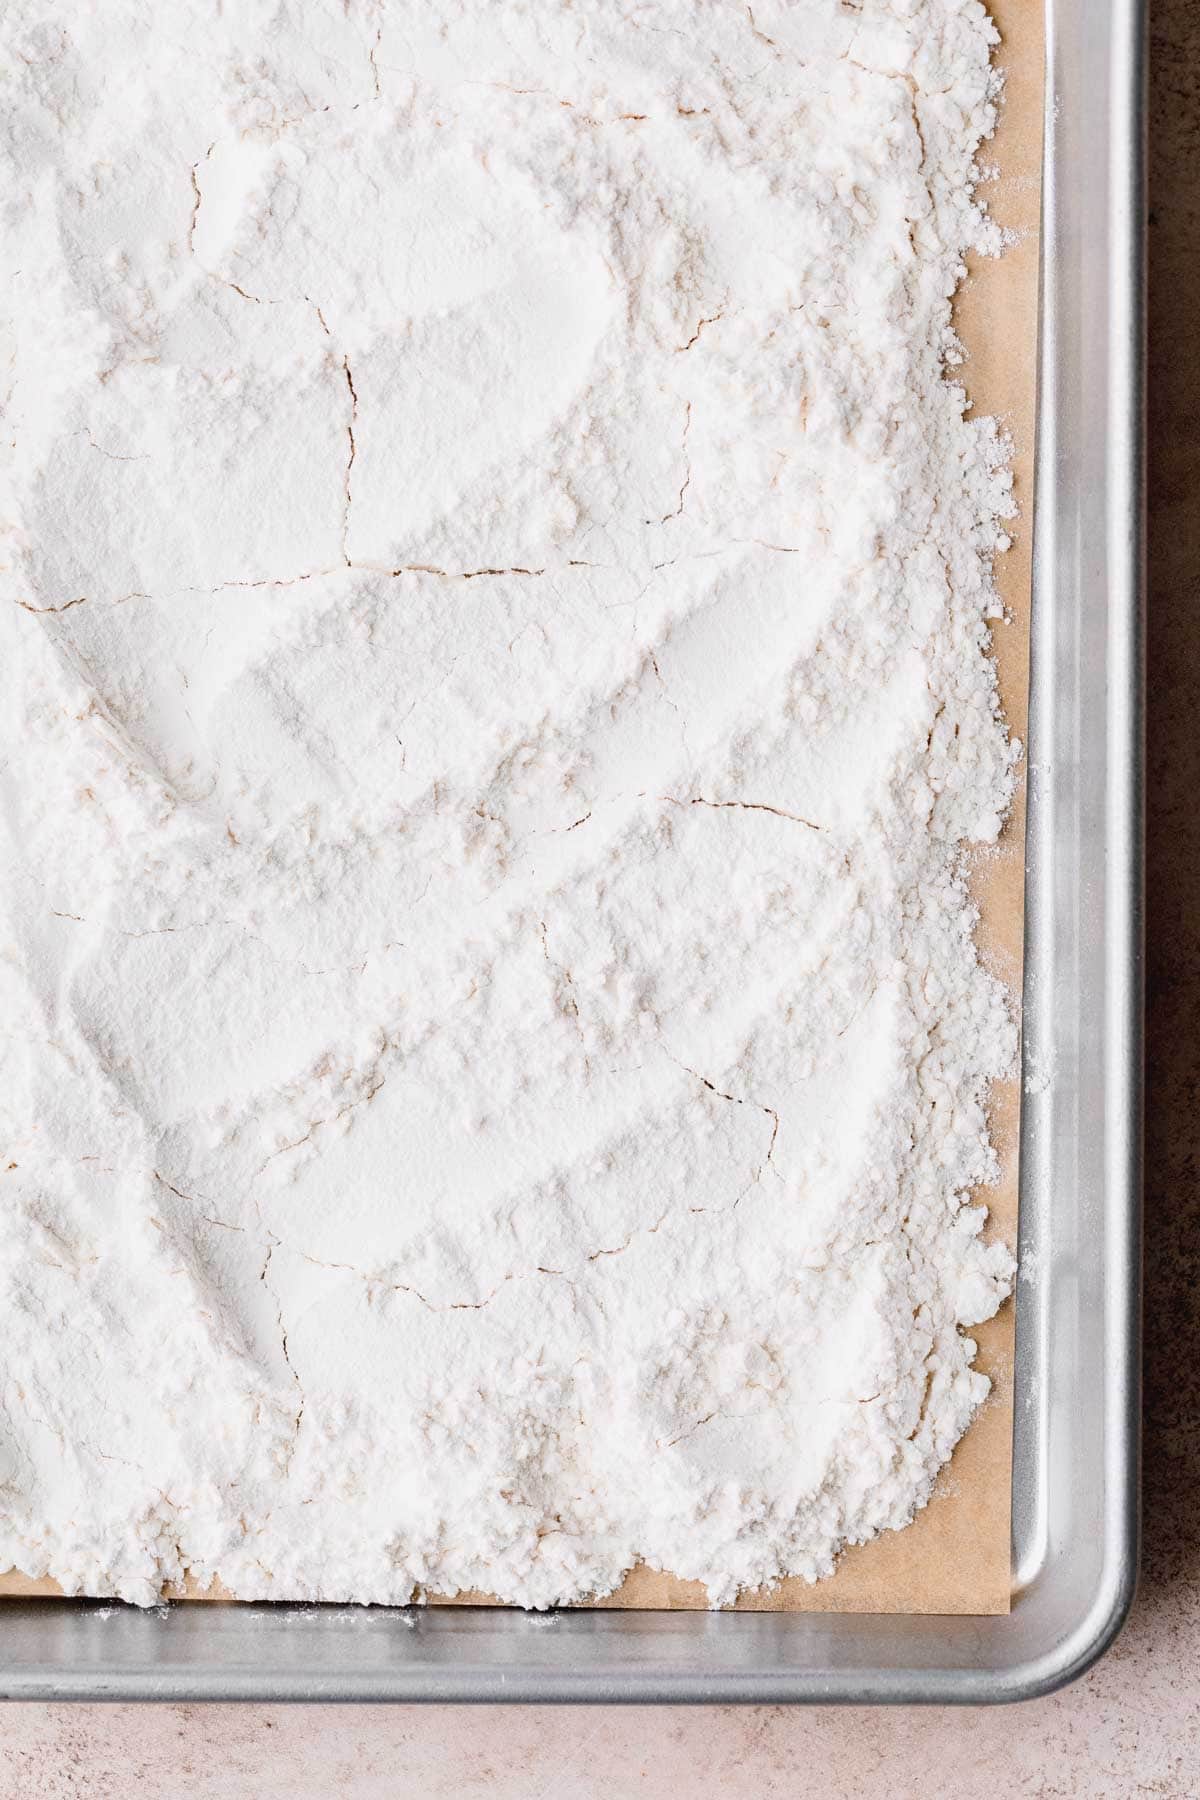 Flour spread out on a baking sheet, ready to be baked.